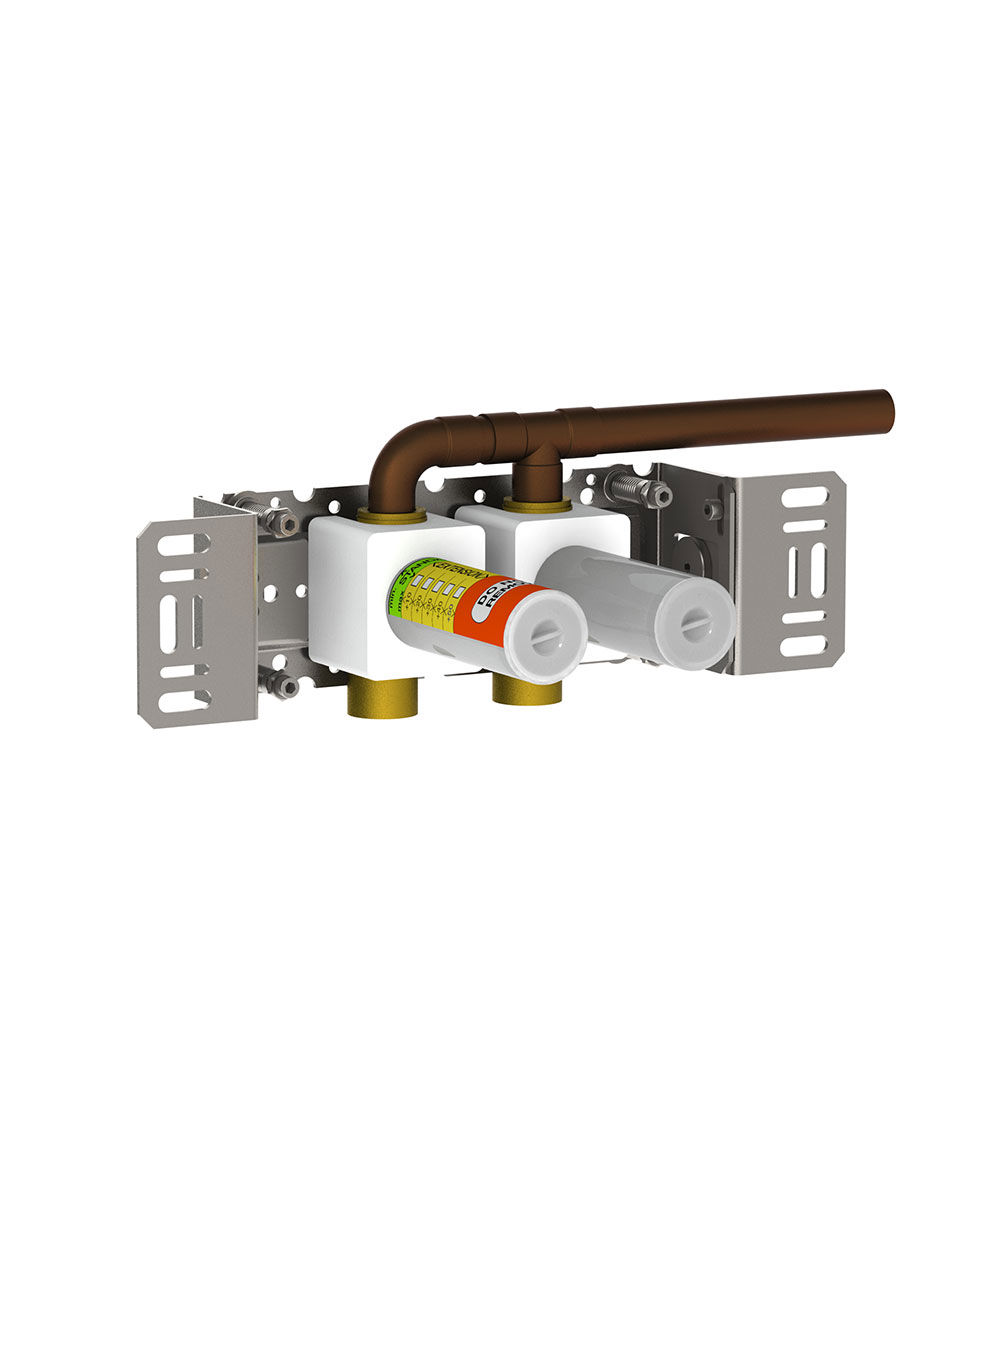 2700V: Two-handle build-in mixer for high flow.¾" connection to copper, steel or iron pipe work.